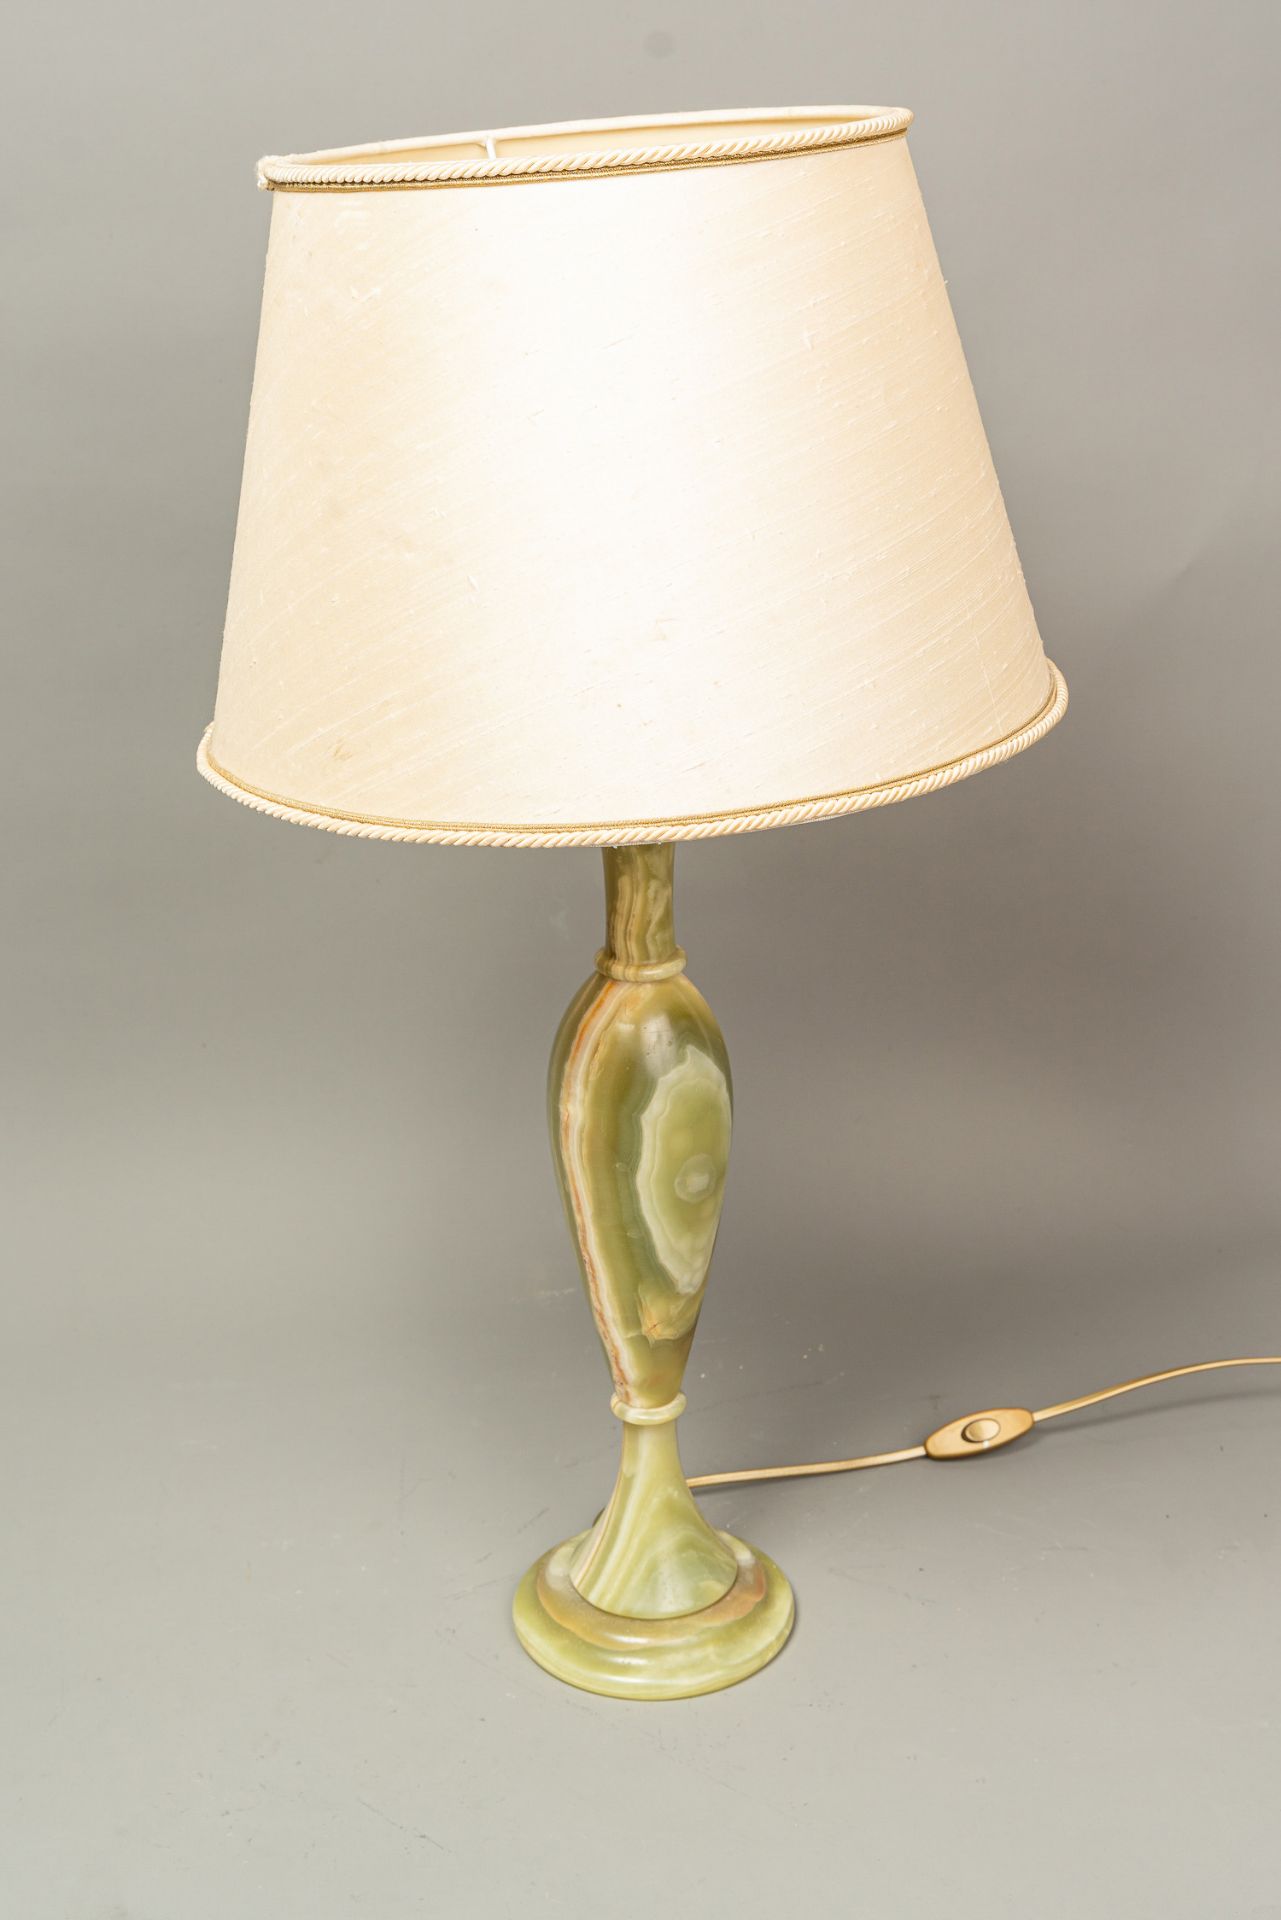 Classical Table Lamp